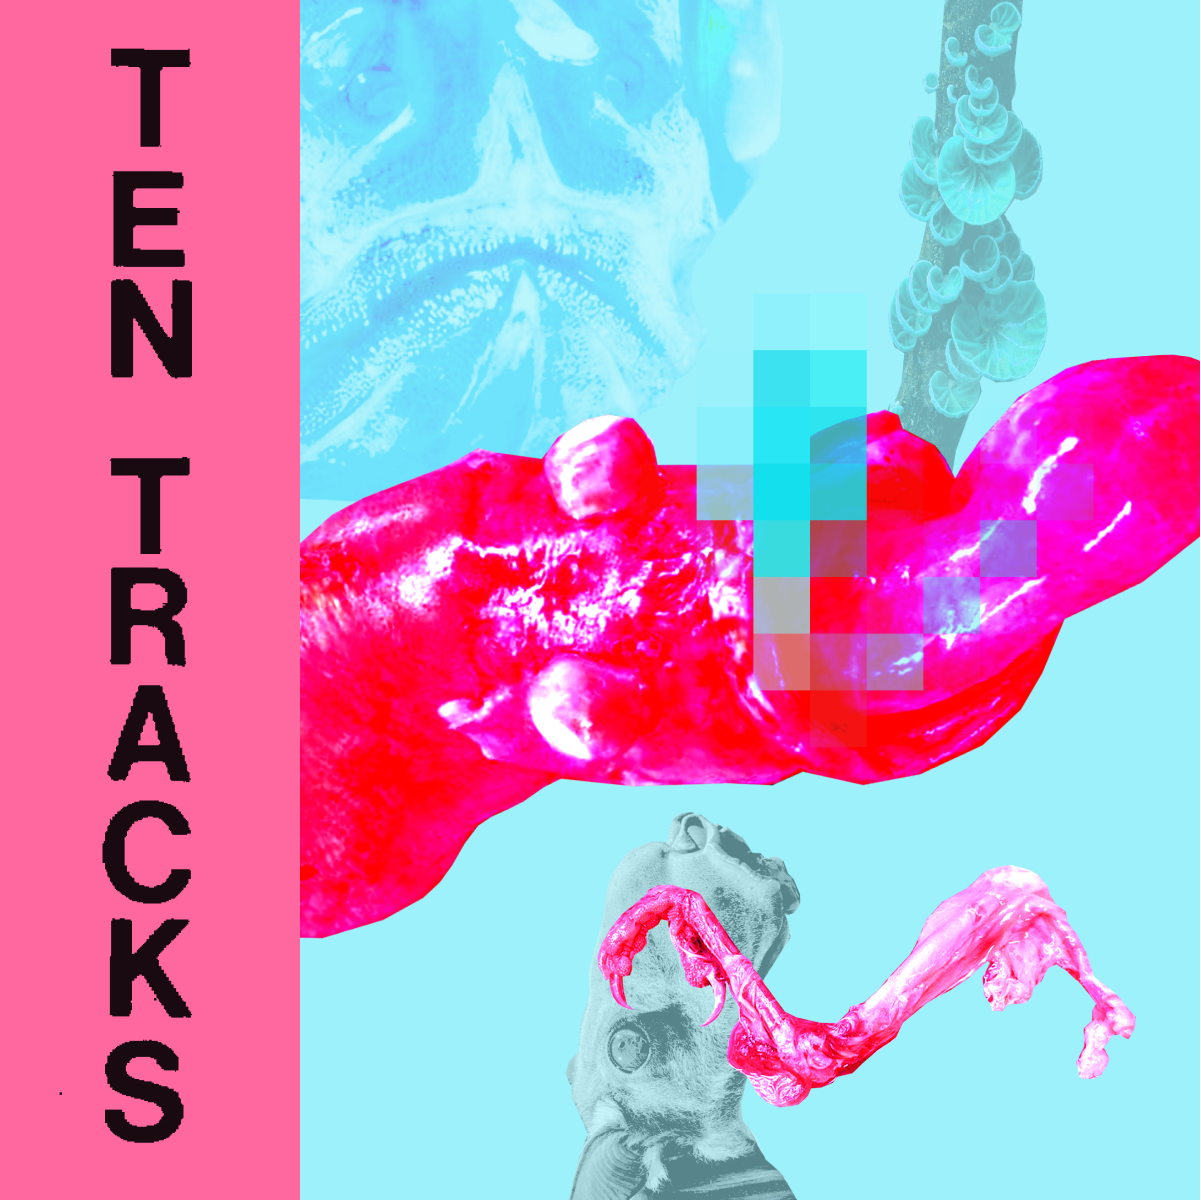 The cover art for Ten Tracks 2 is bright bat limbs and collaged weirdness. Artwork by Lily Wales, an artist from Birmingham